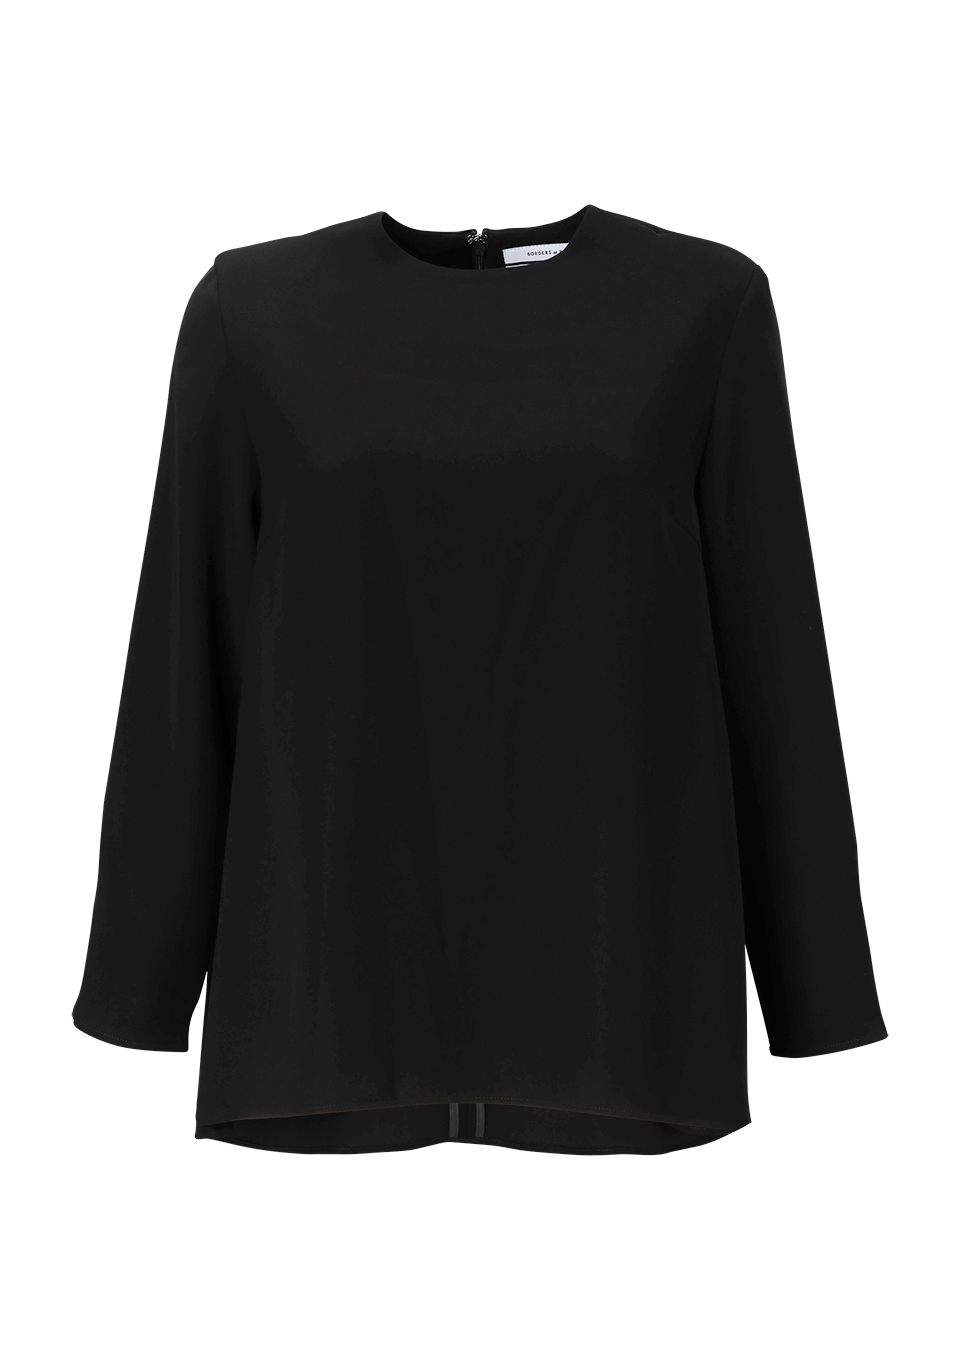 TWILL FLARE BLOUSE